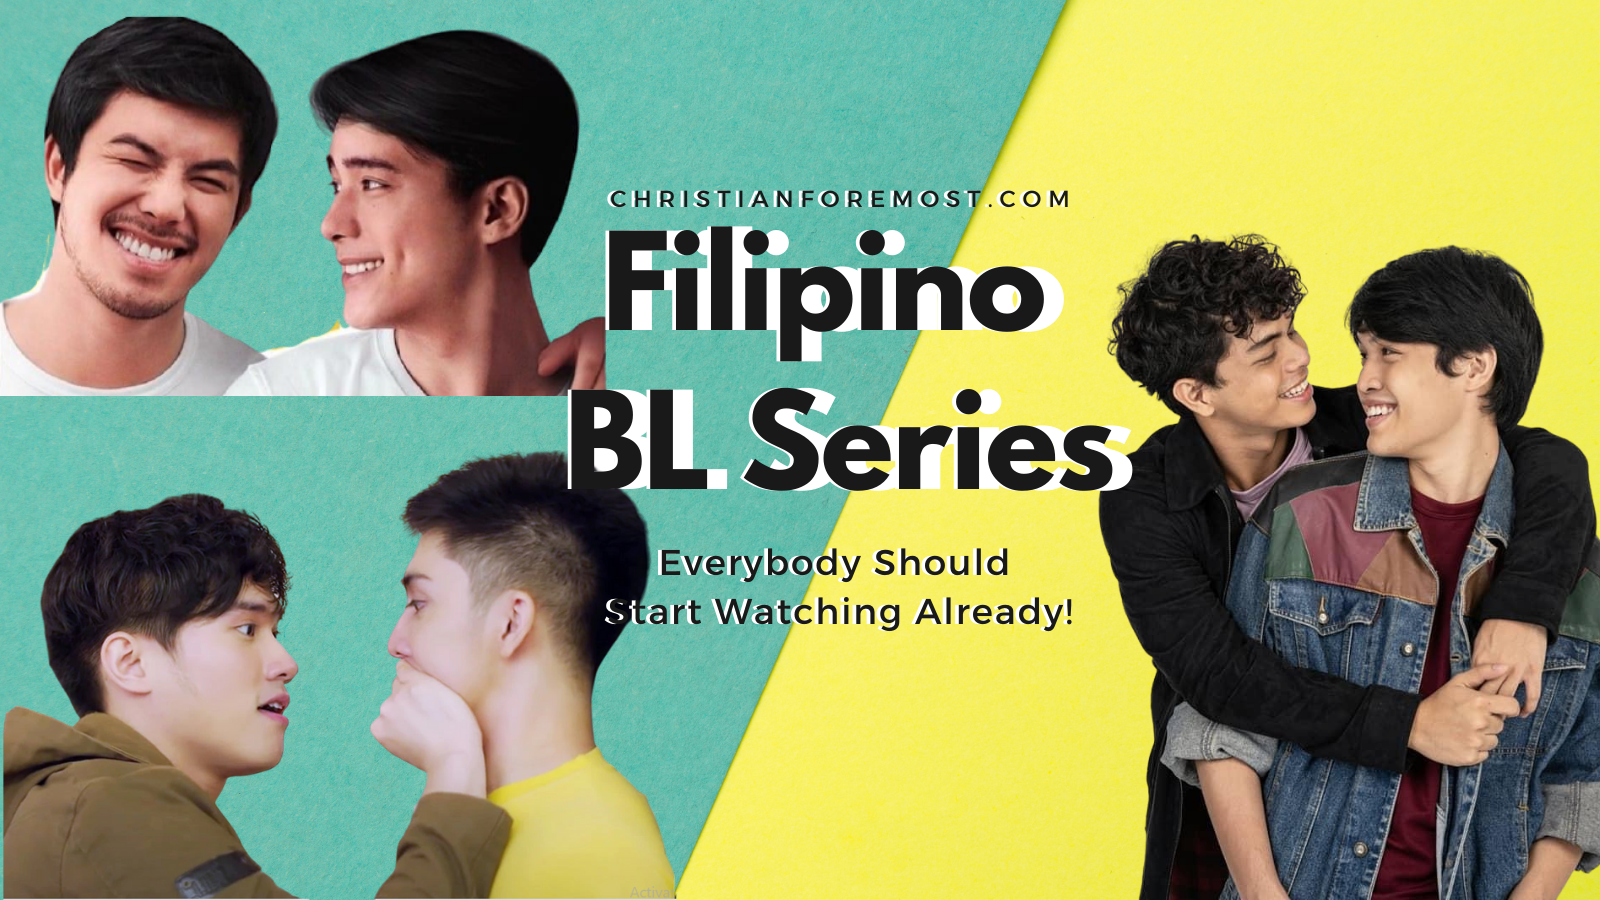 List of Filipino BL Online Series Everybody Should Start Watching Already! - 2020